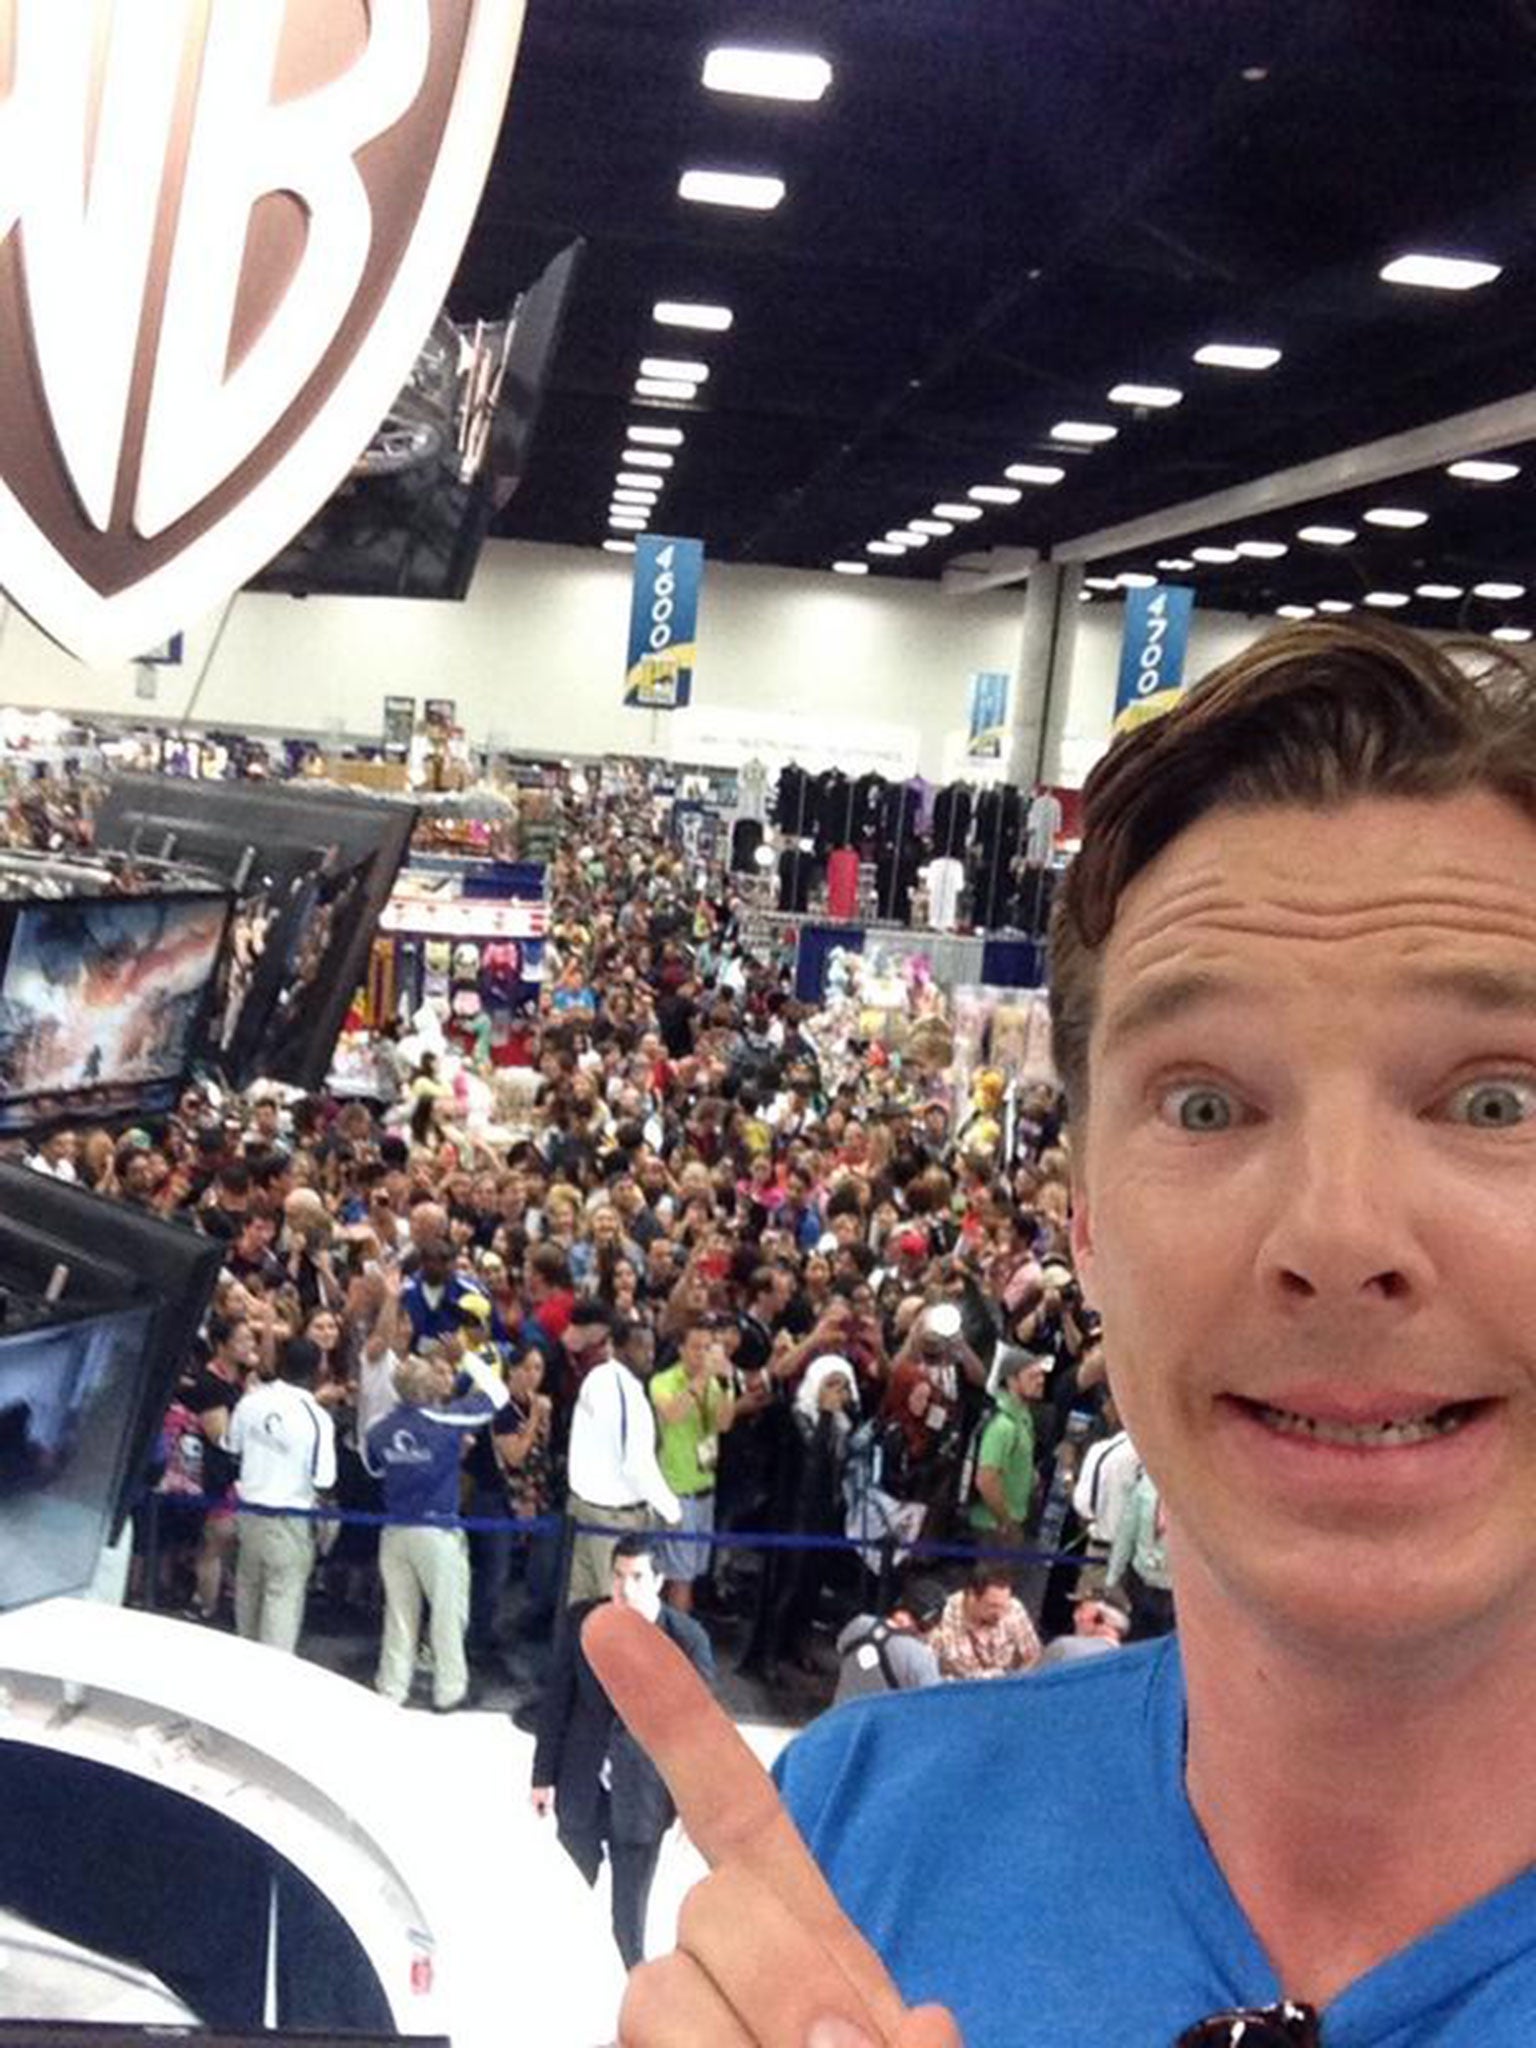 Benedict Cumberbatch posted this selfie from Comic-Con